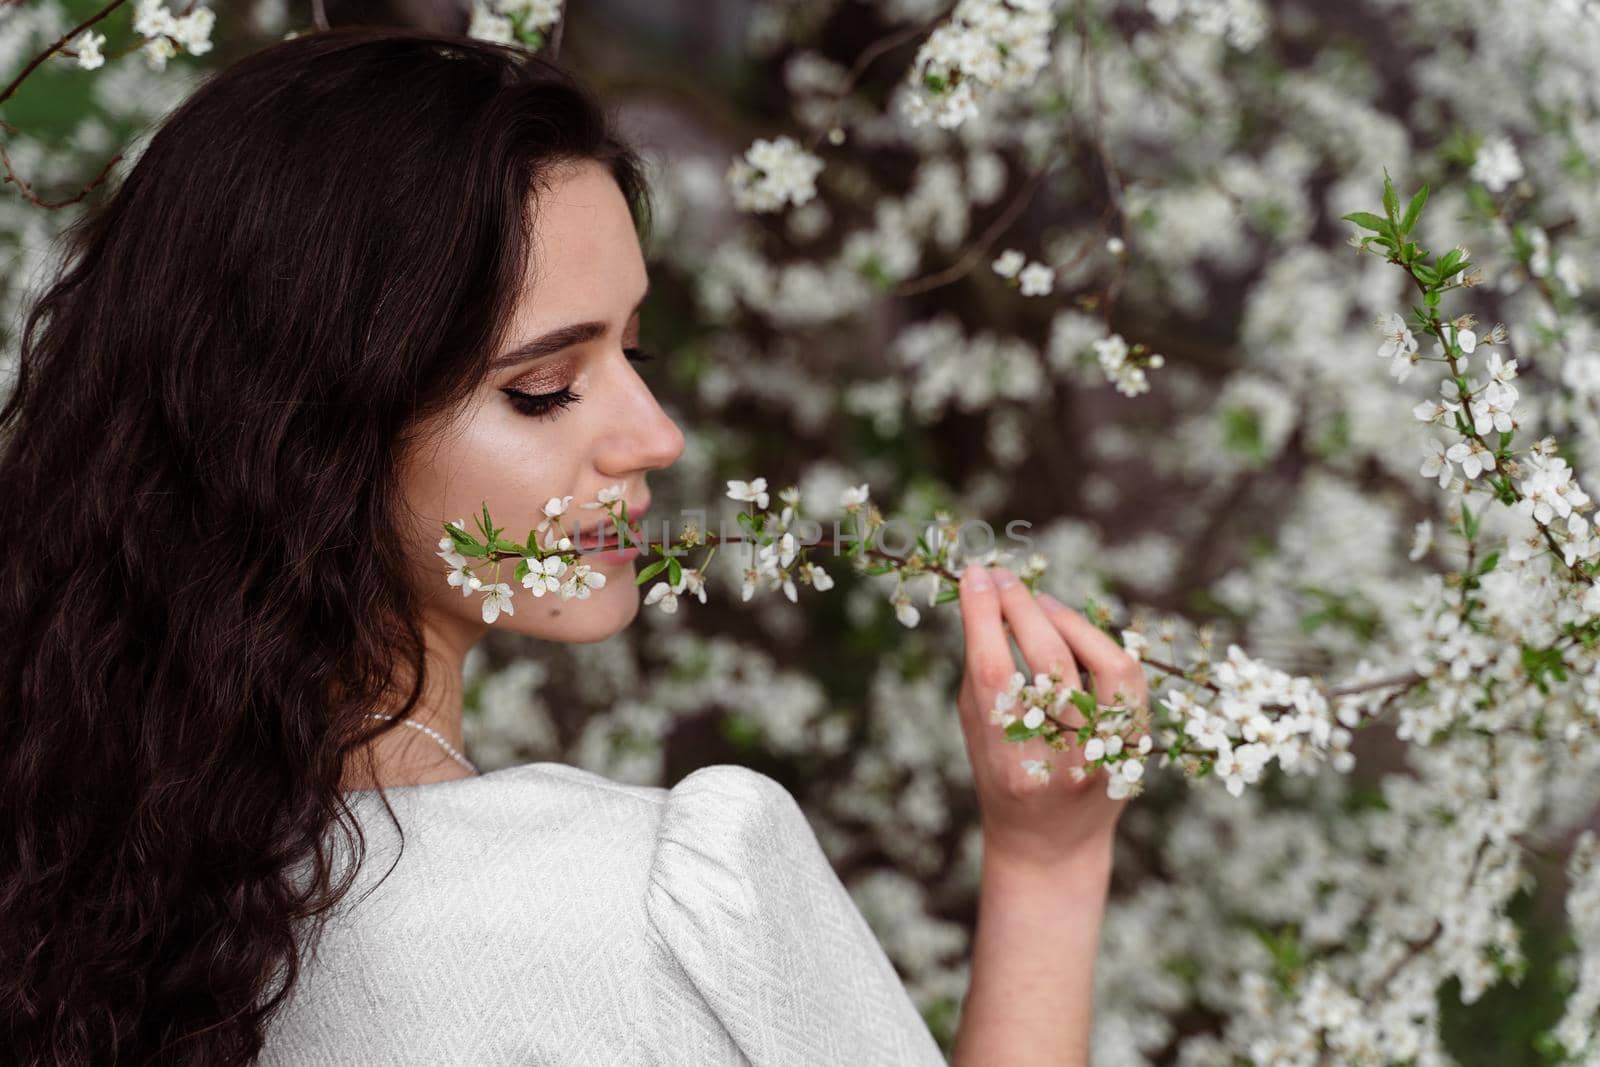 Girl touches and sniffs a branch of a white flowering tree without medical mask. Spring walking in the park